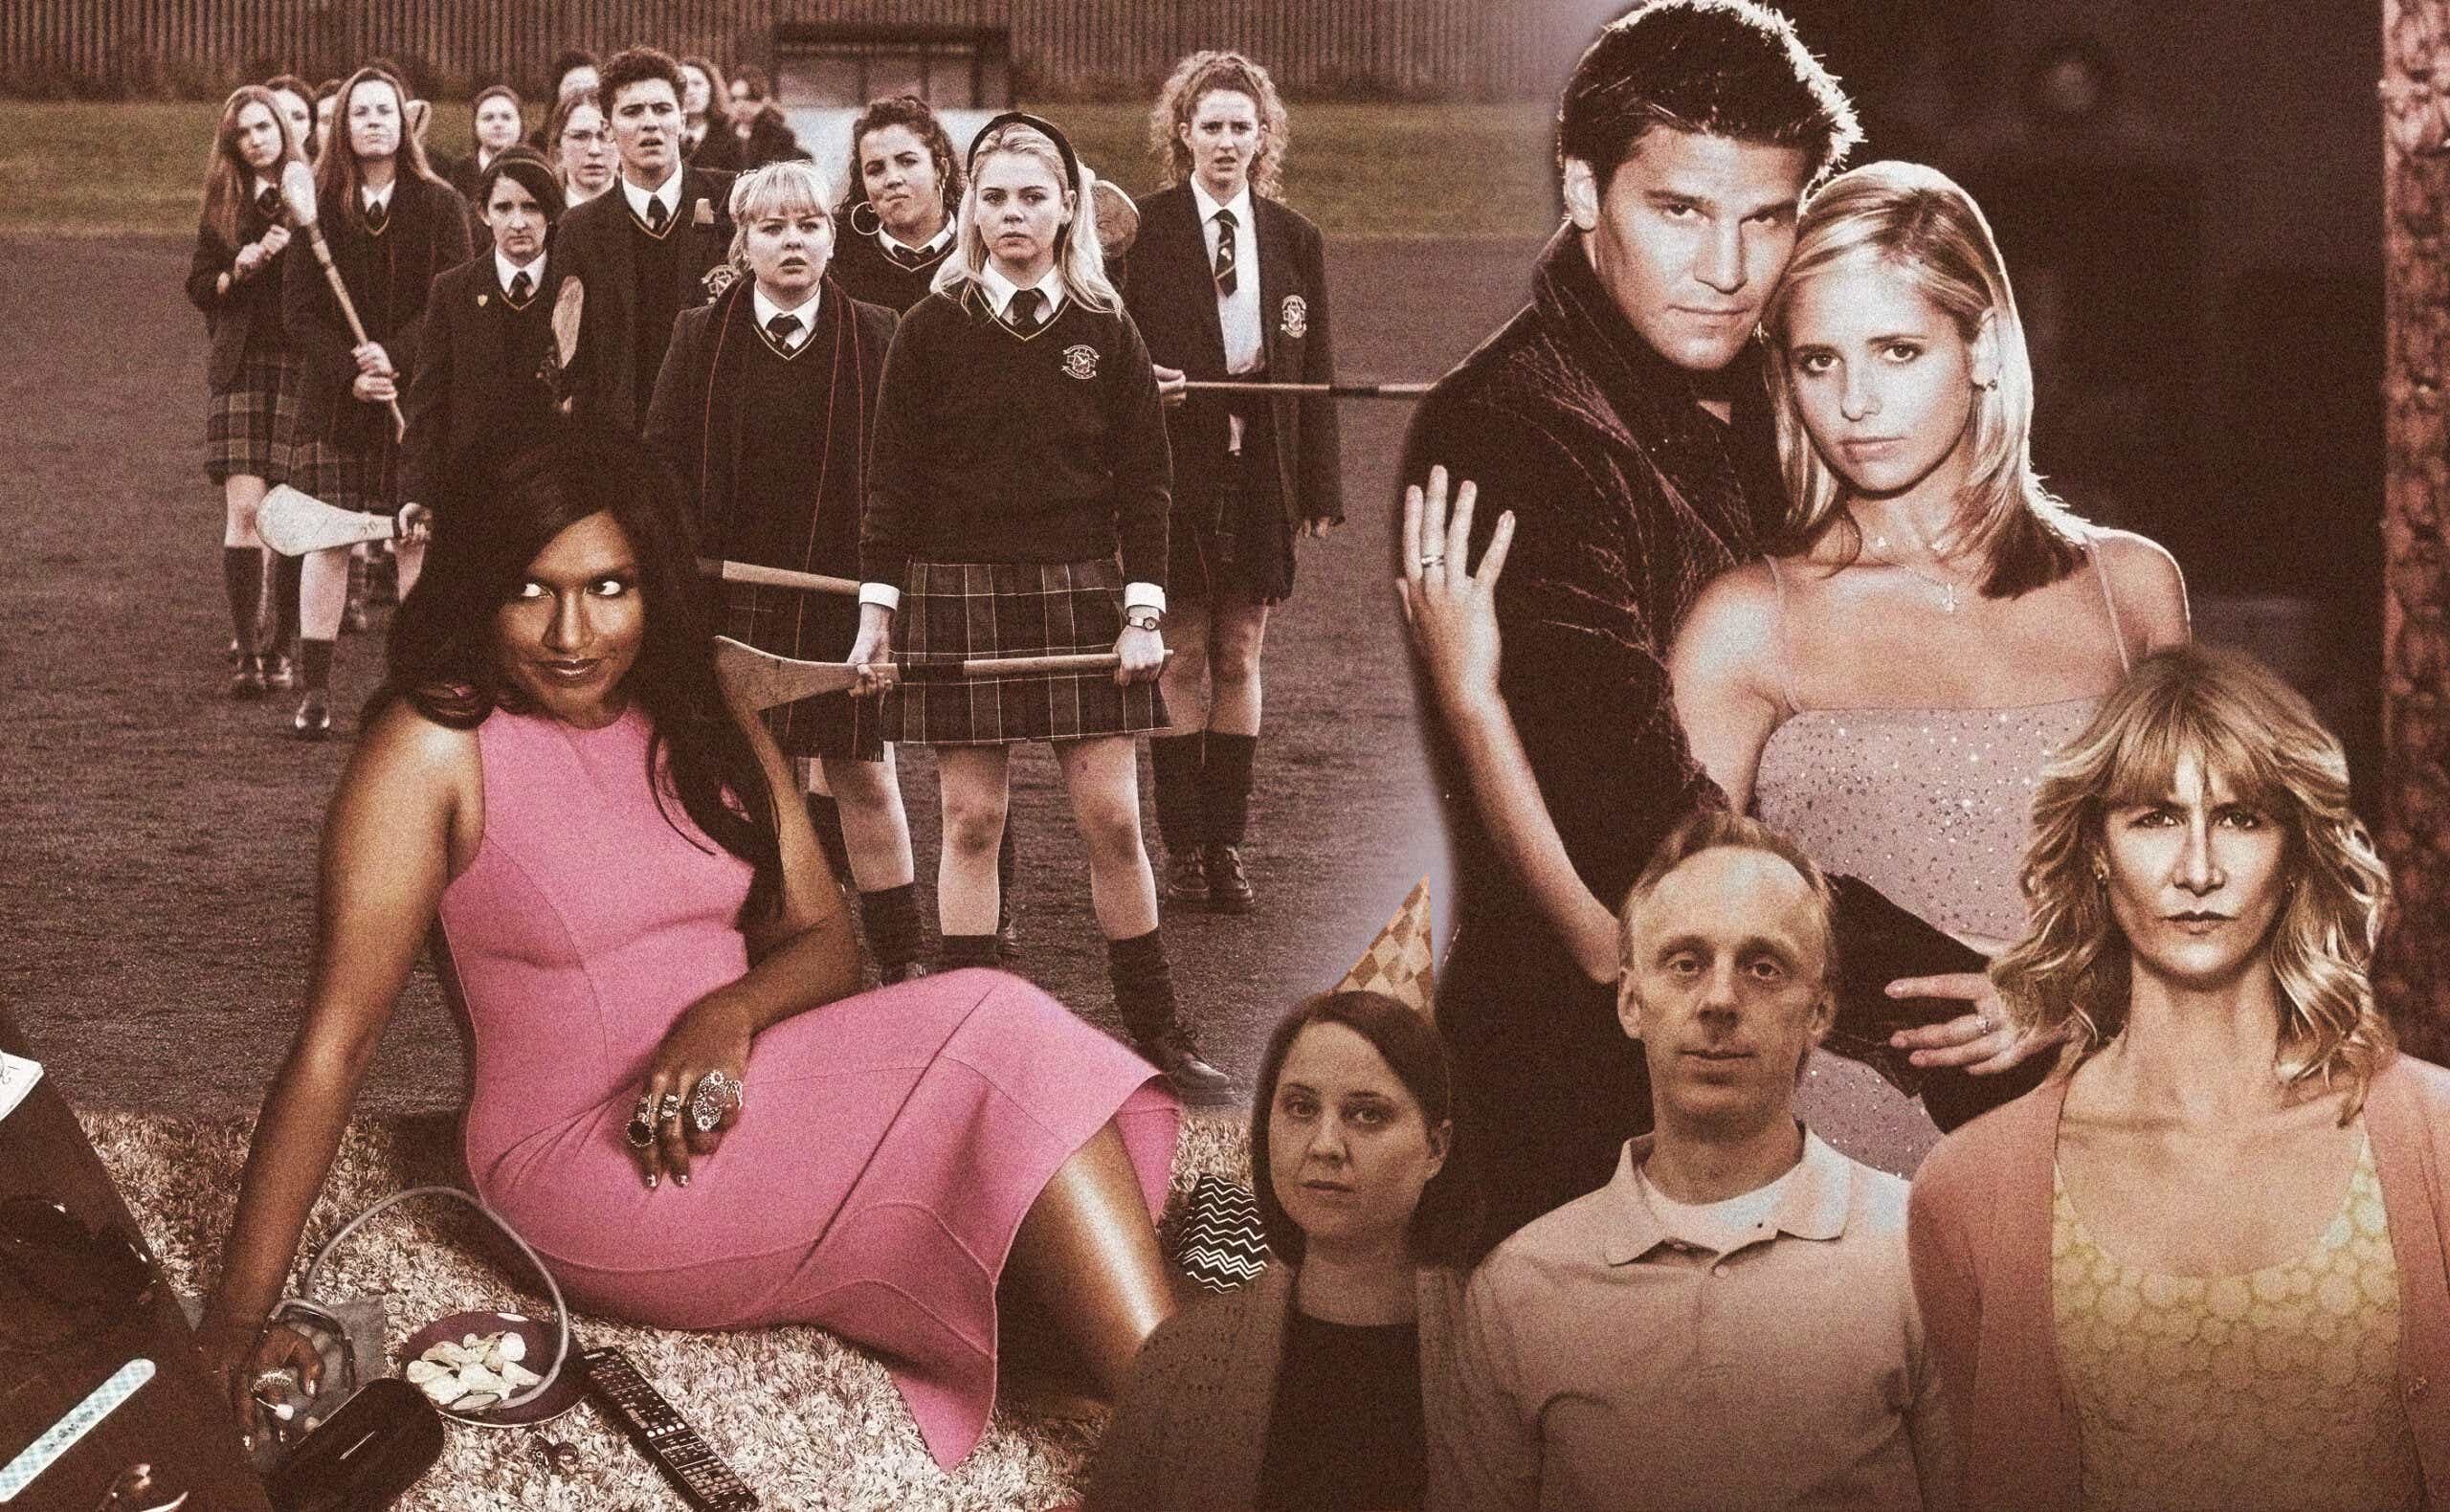 Stills from Derry Girls, The Mindy Project, Buffy the Vampire Slayer, Enlightened